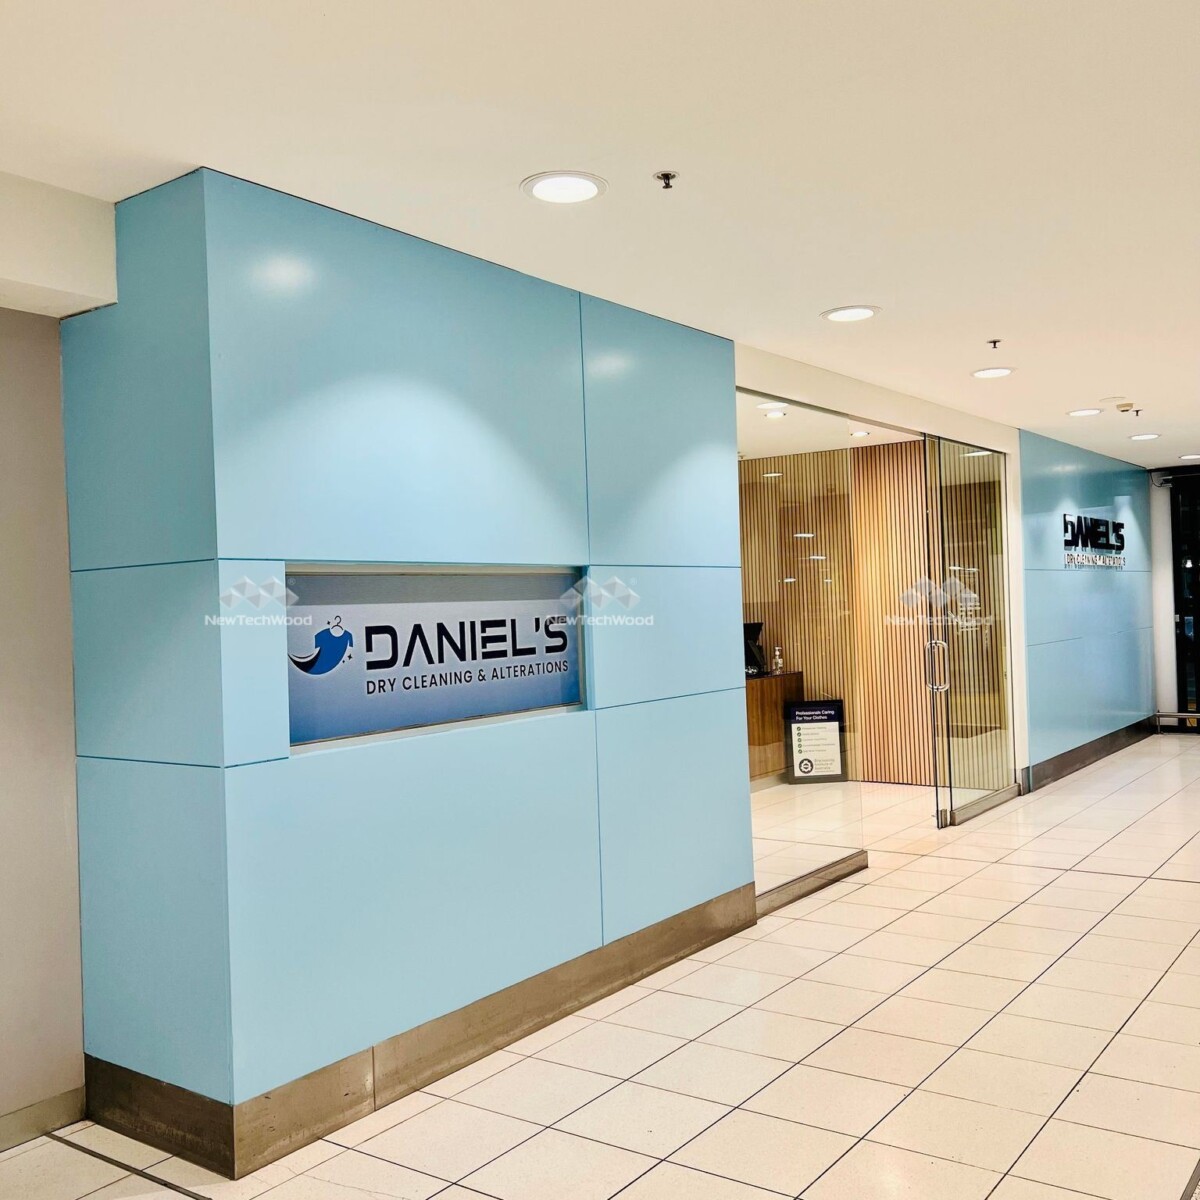 Daniels Dry Cleaning & Alterations, Pakenham Central Marketplace, Melbourne, VIC